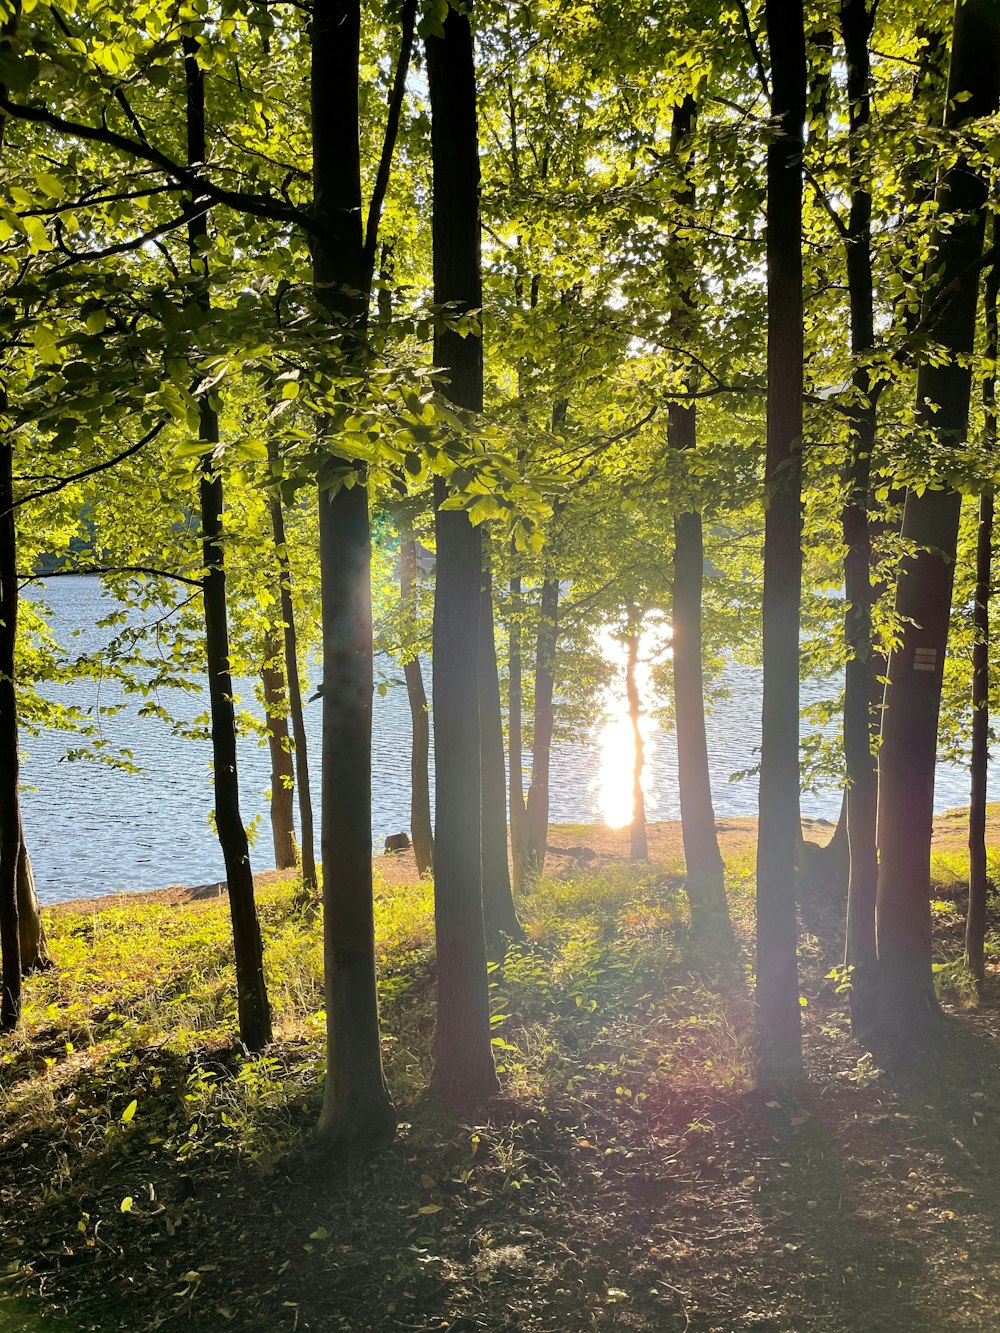 green trees near body of water during daytime